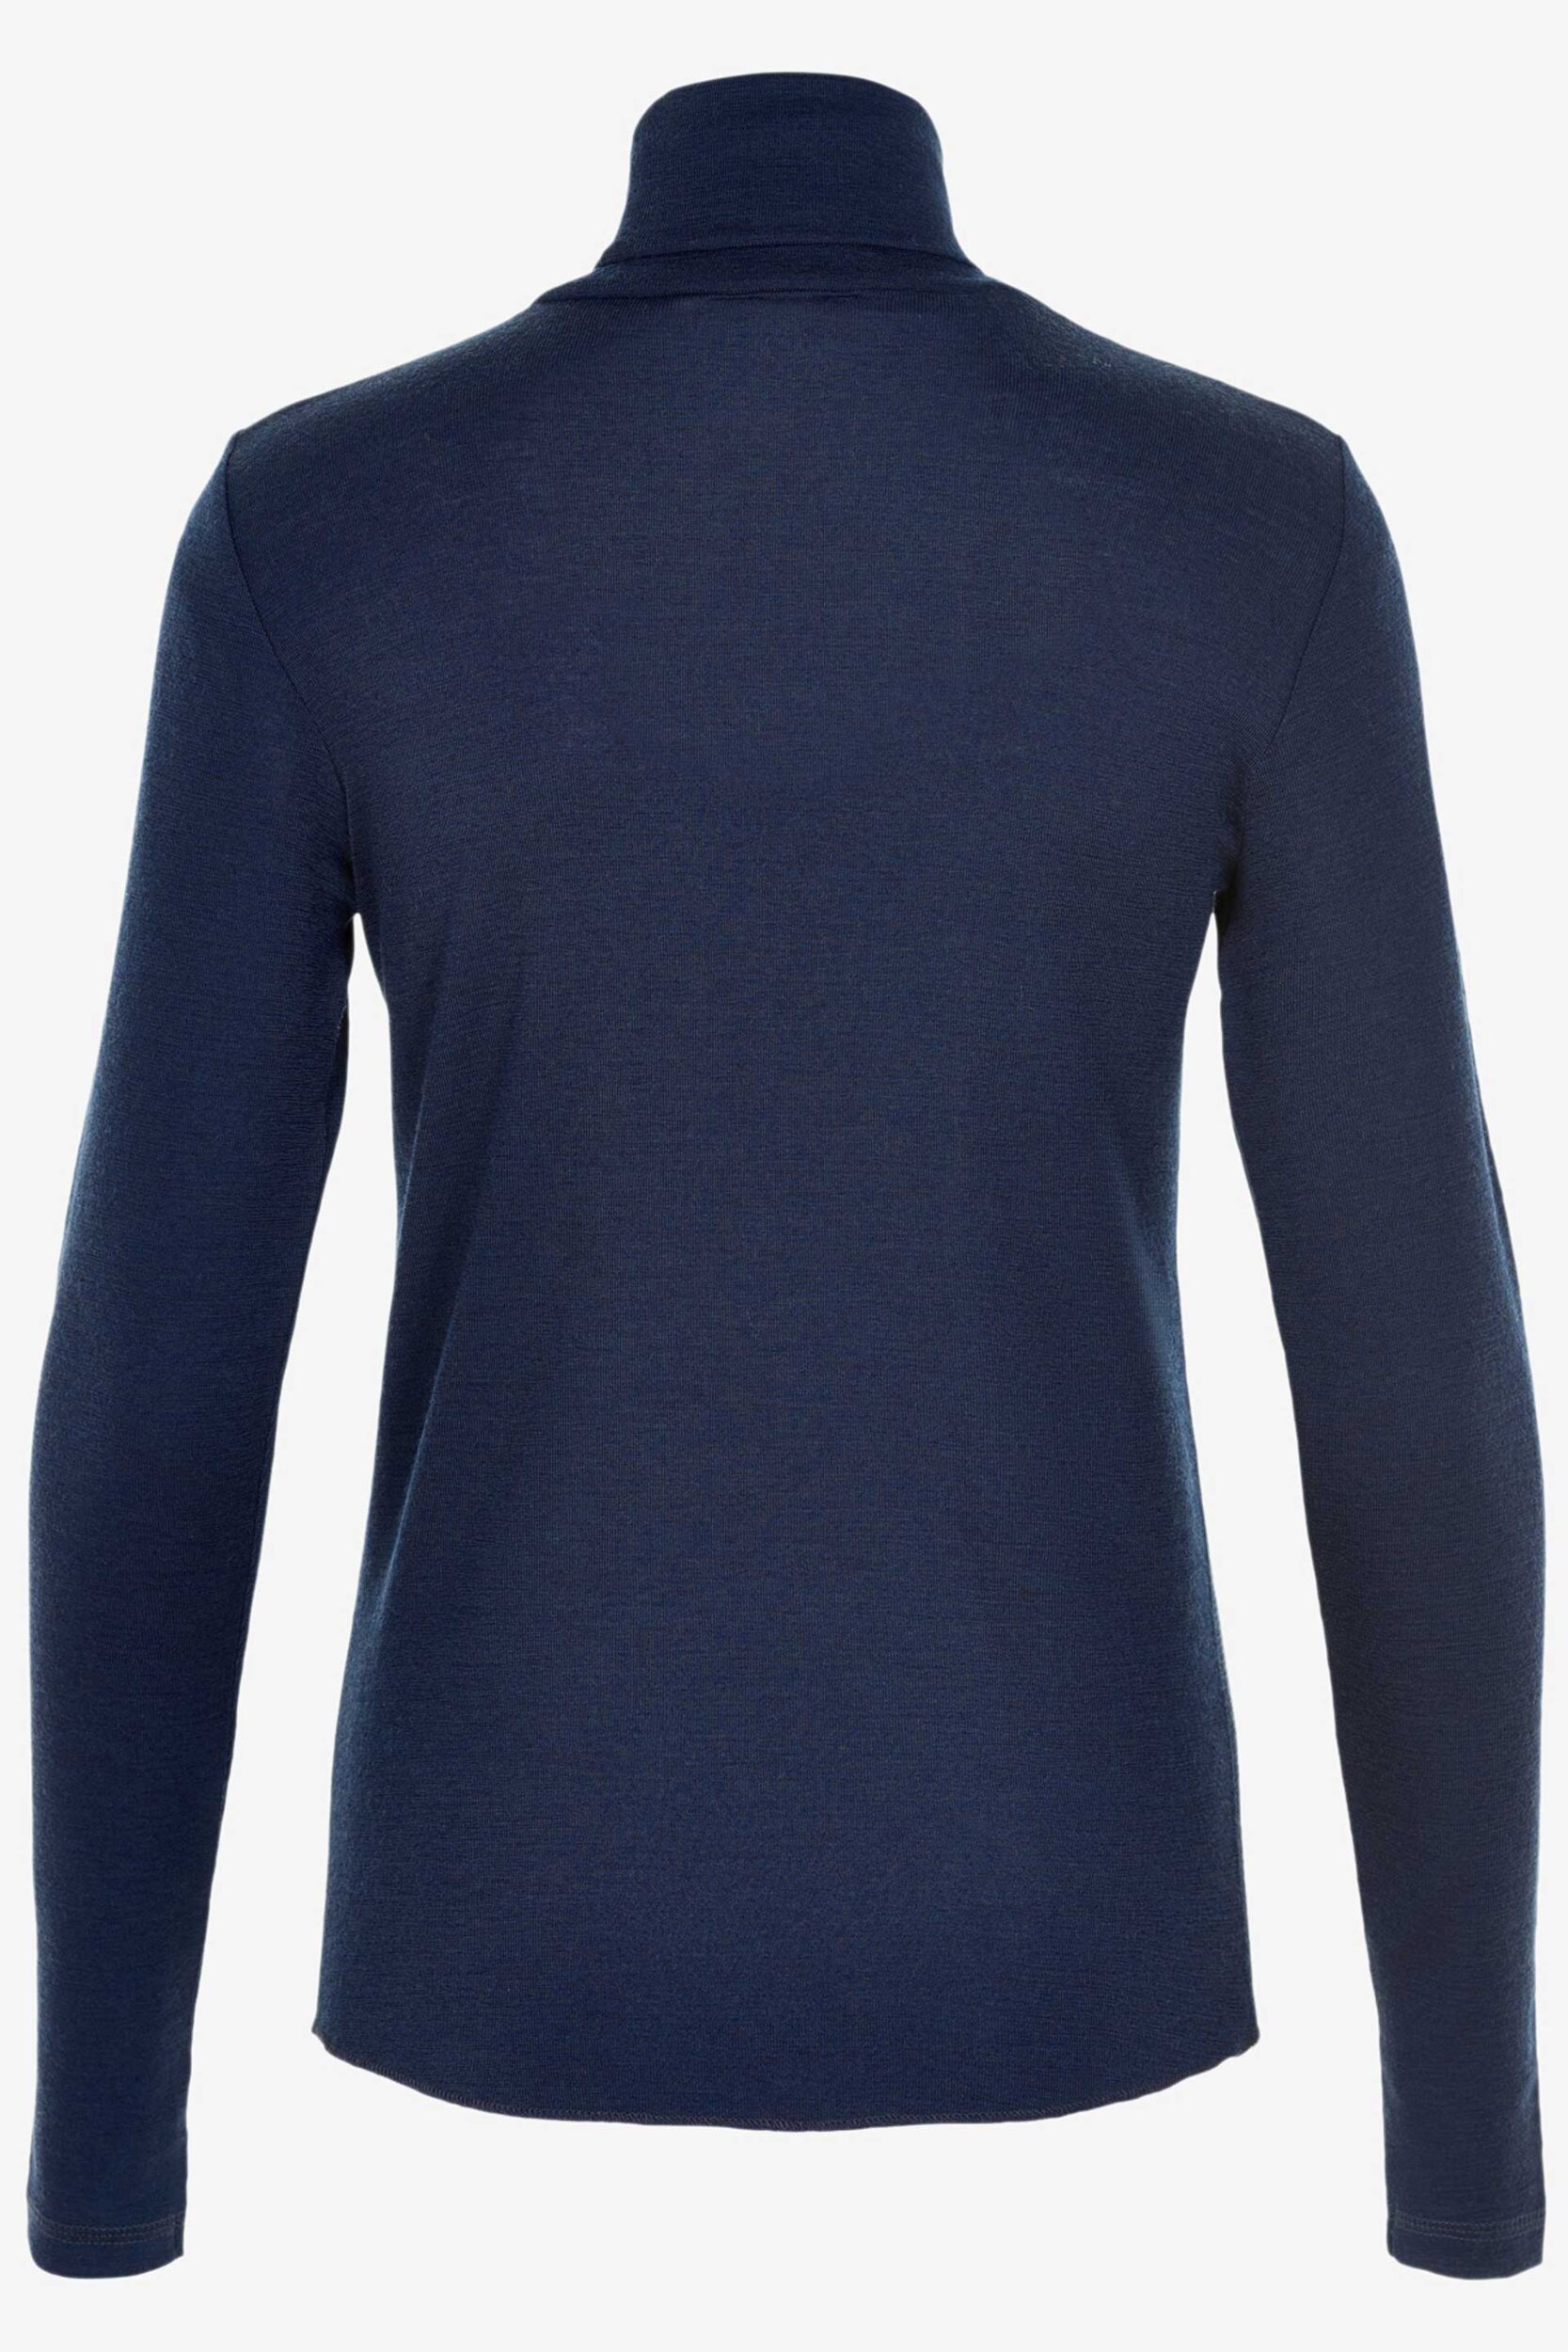 Wendy Sweater Night Sky Perfect classic rollneck - back image